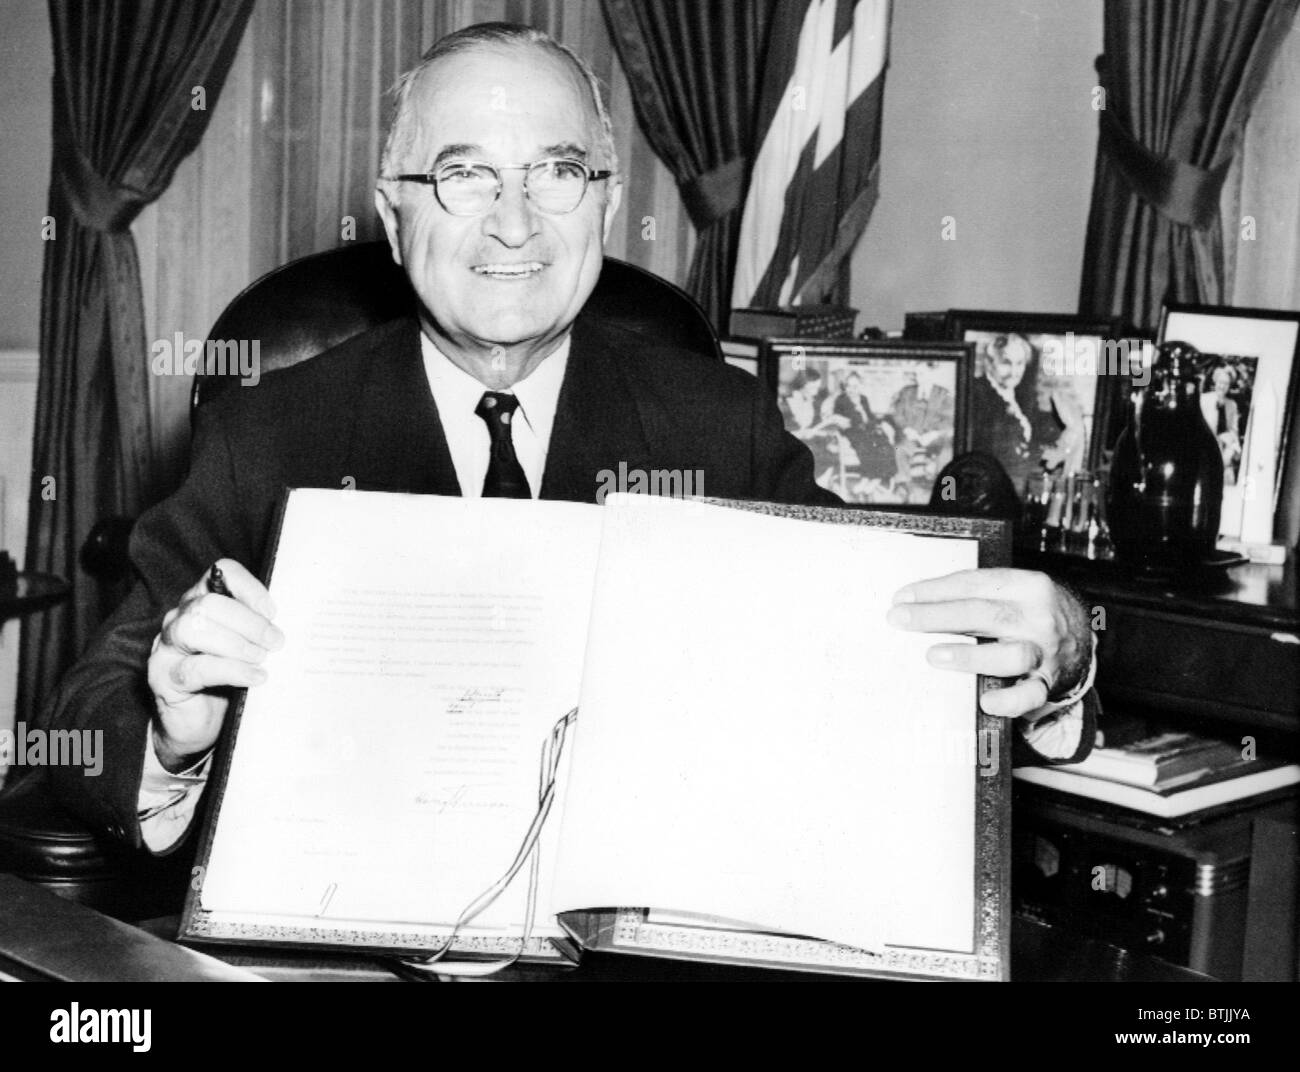 PRESIDENT HARRY TRUMAN holds up the Japanese peace treaty he signed into ratification, 4/15/52. Stock Photo